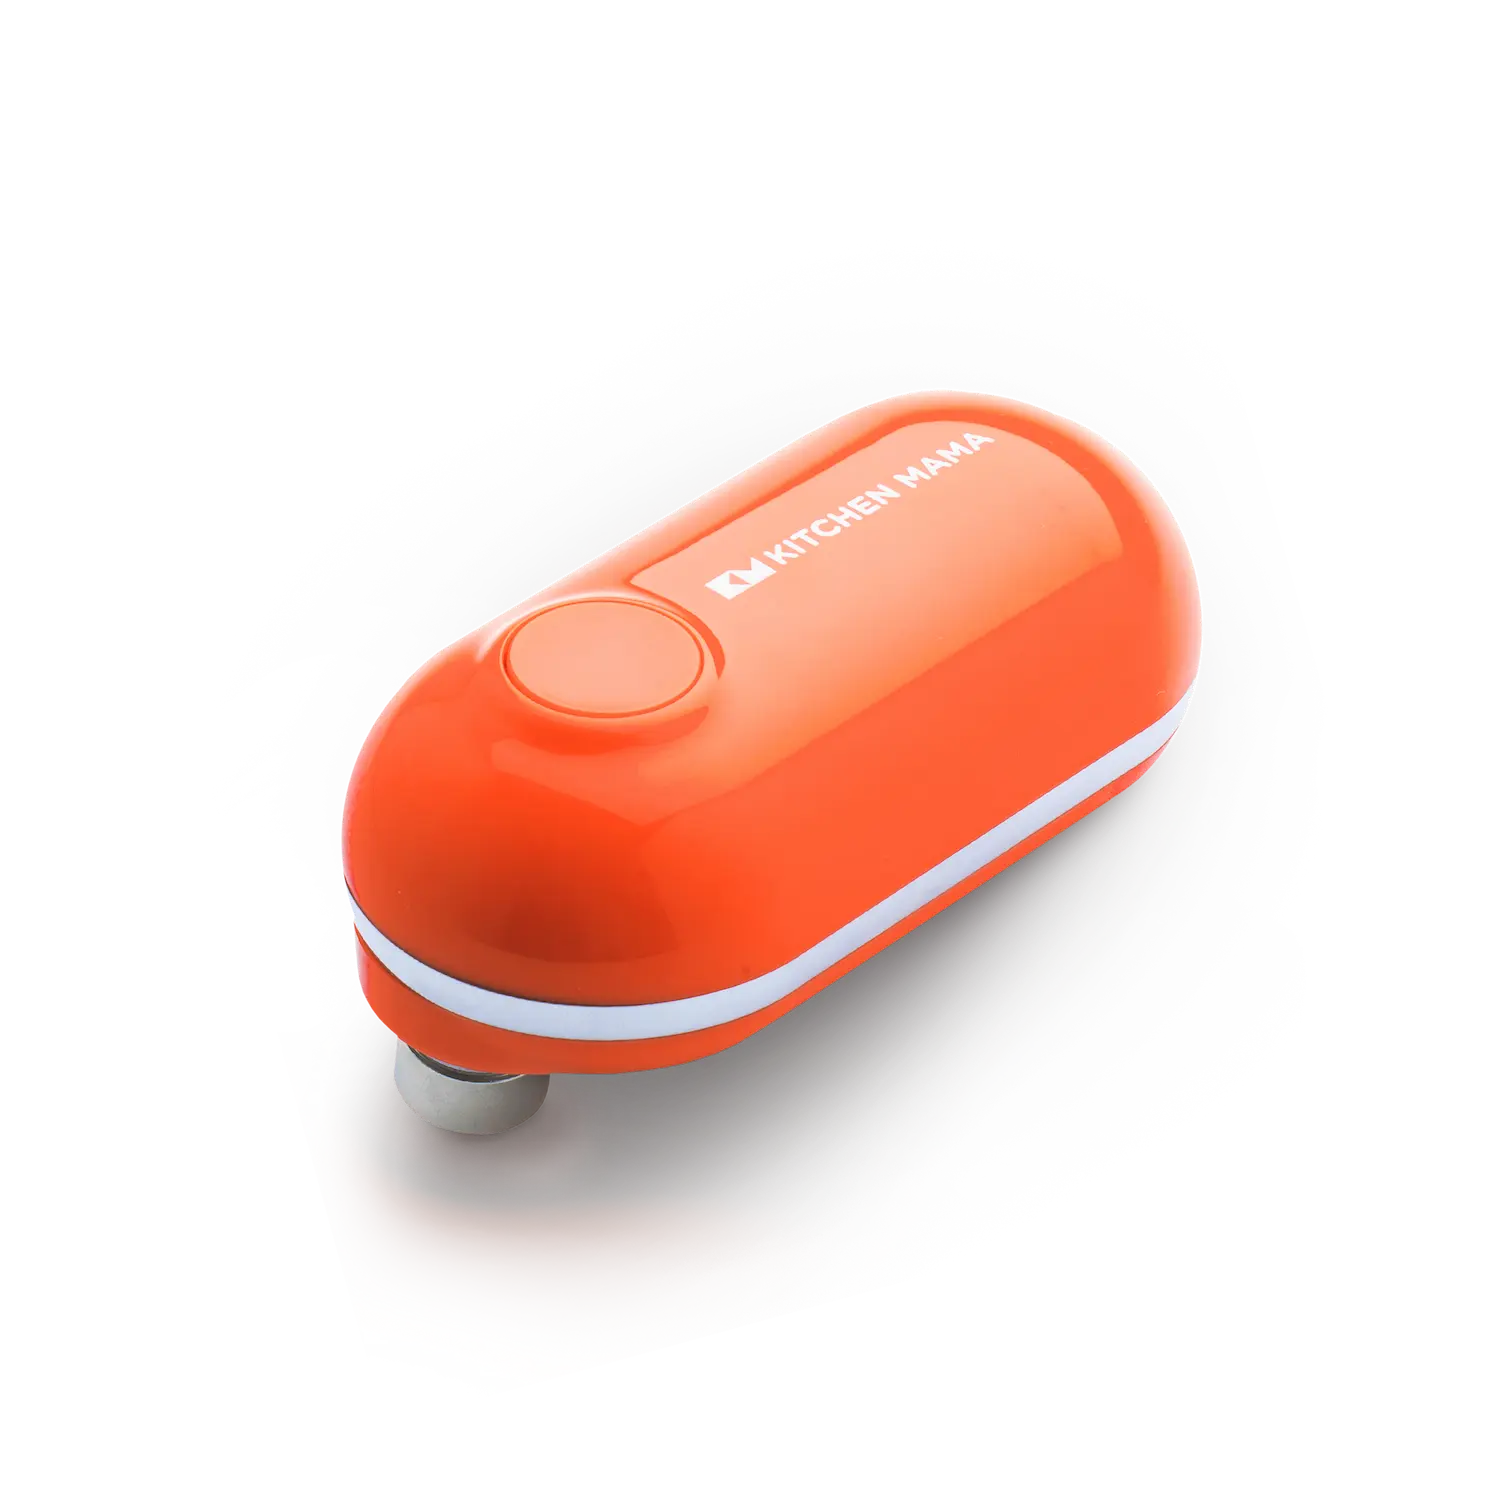 Mini Electric Can Opener - The Smallest Electric Can Opener, Orange, CO1200-O, battery operated can opener, electric can openers for kitchen, orange electric can opener, can openers prime for seniors with arthritis, portable can opener, space saver can opener